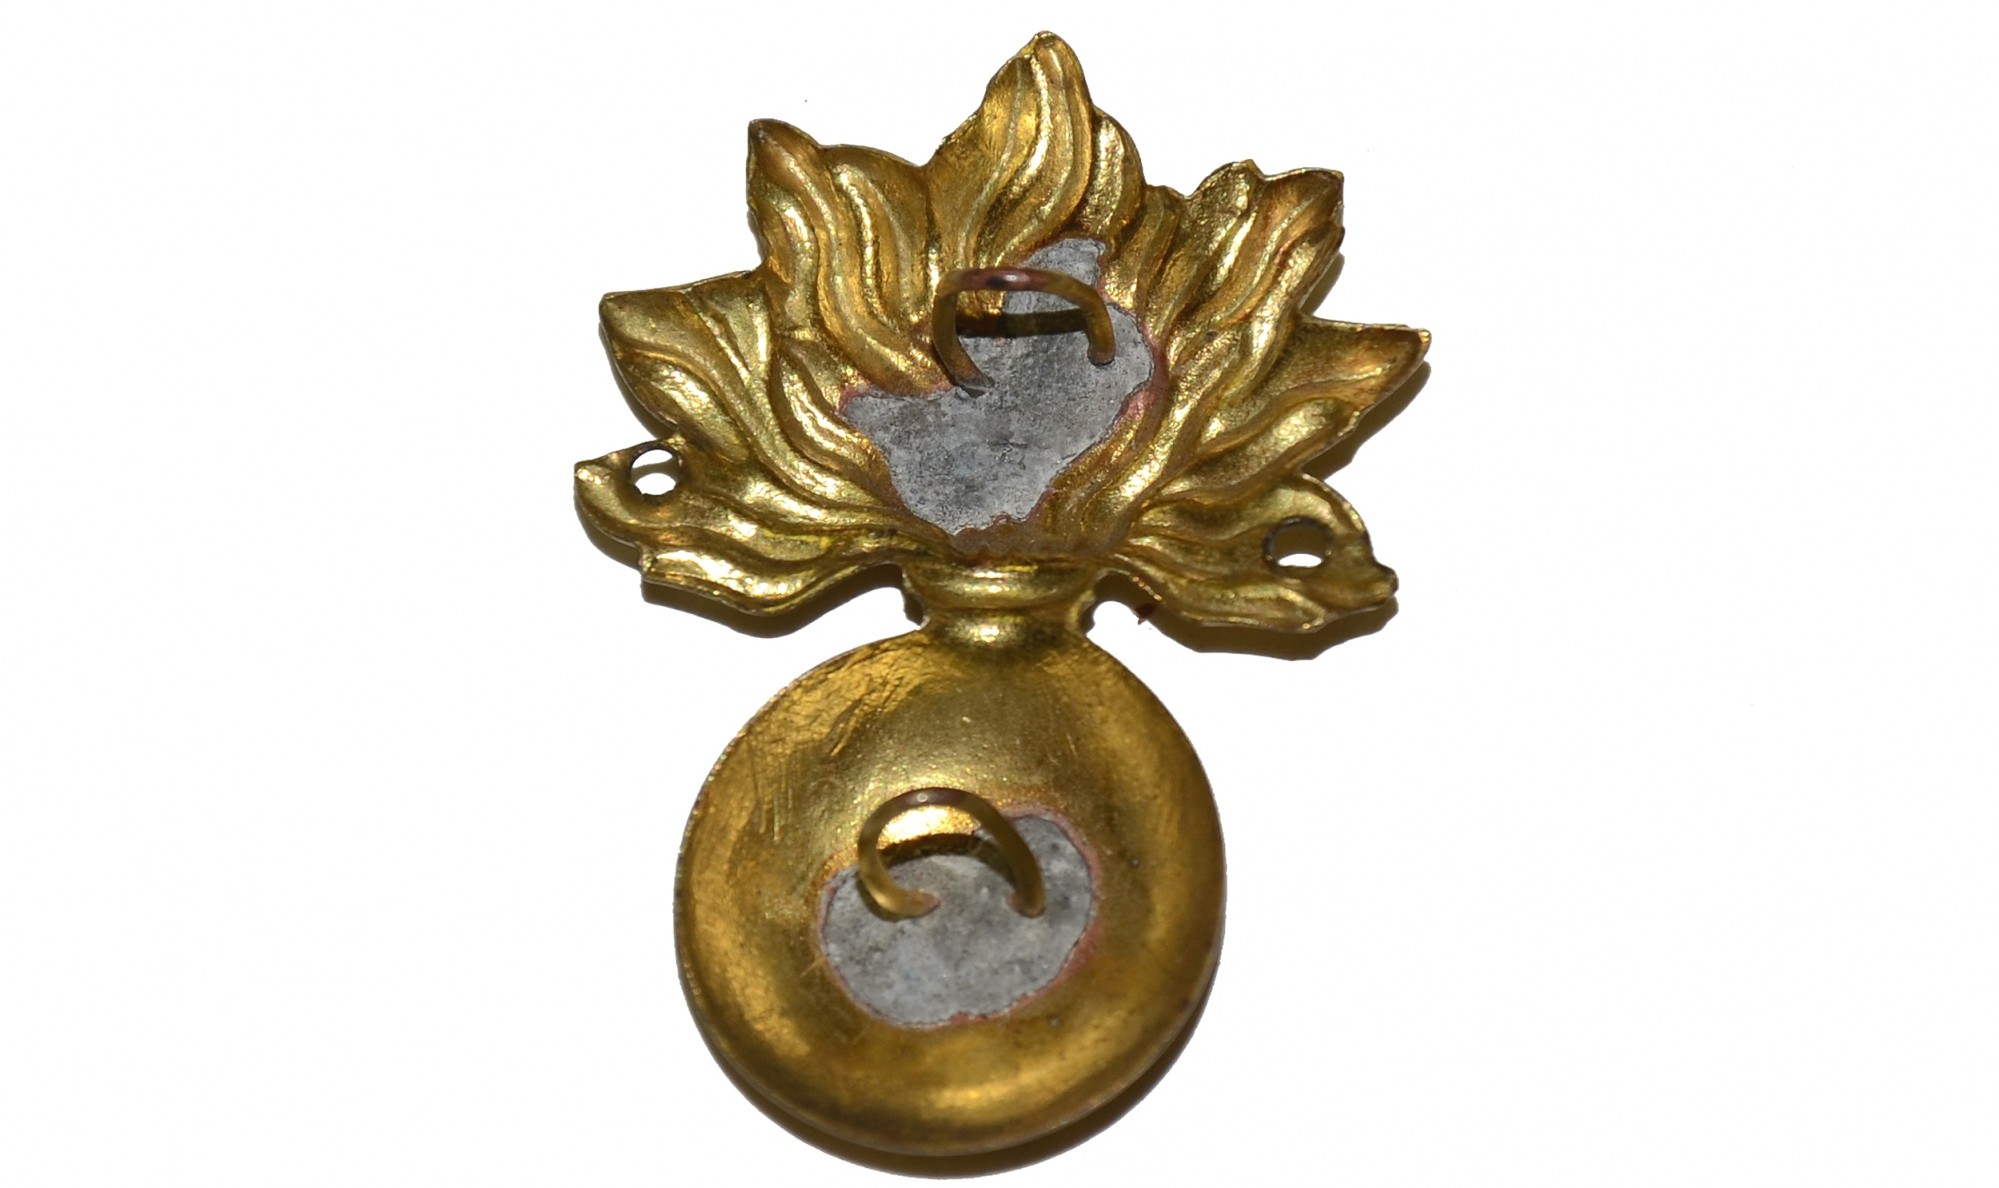 EXCELLENT, ORIGINAL ORDNANCE ‘FLAMING BOMB’ STAMPED BRASS INSIGNIA ...